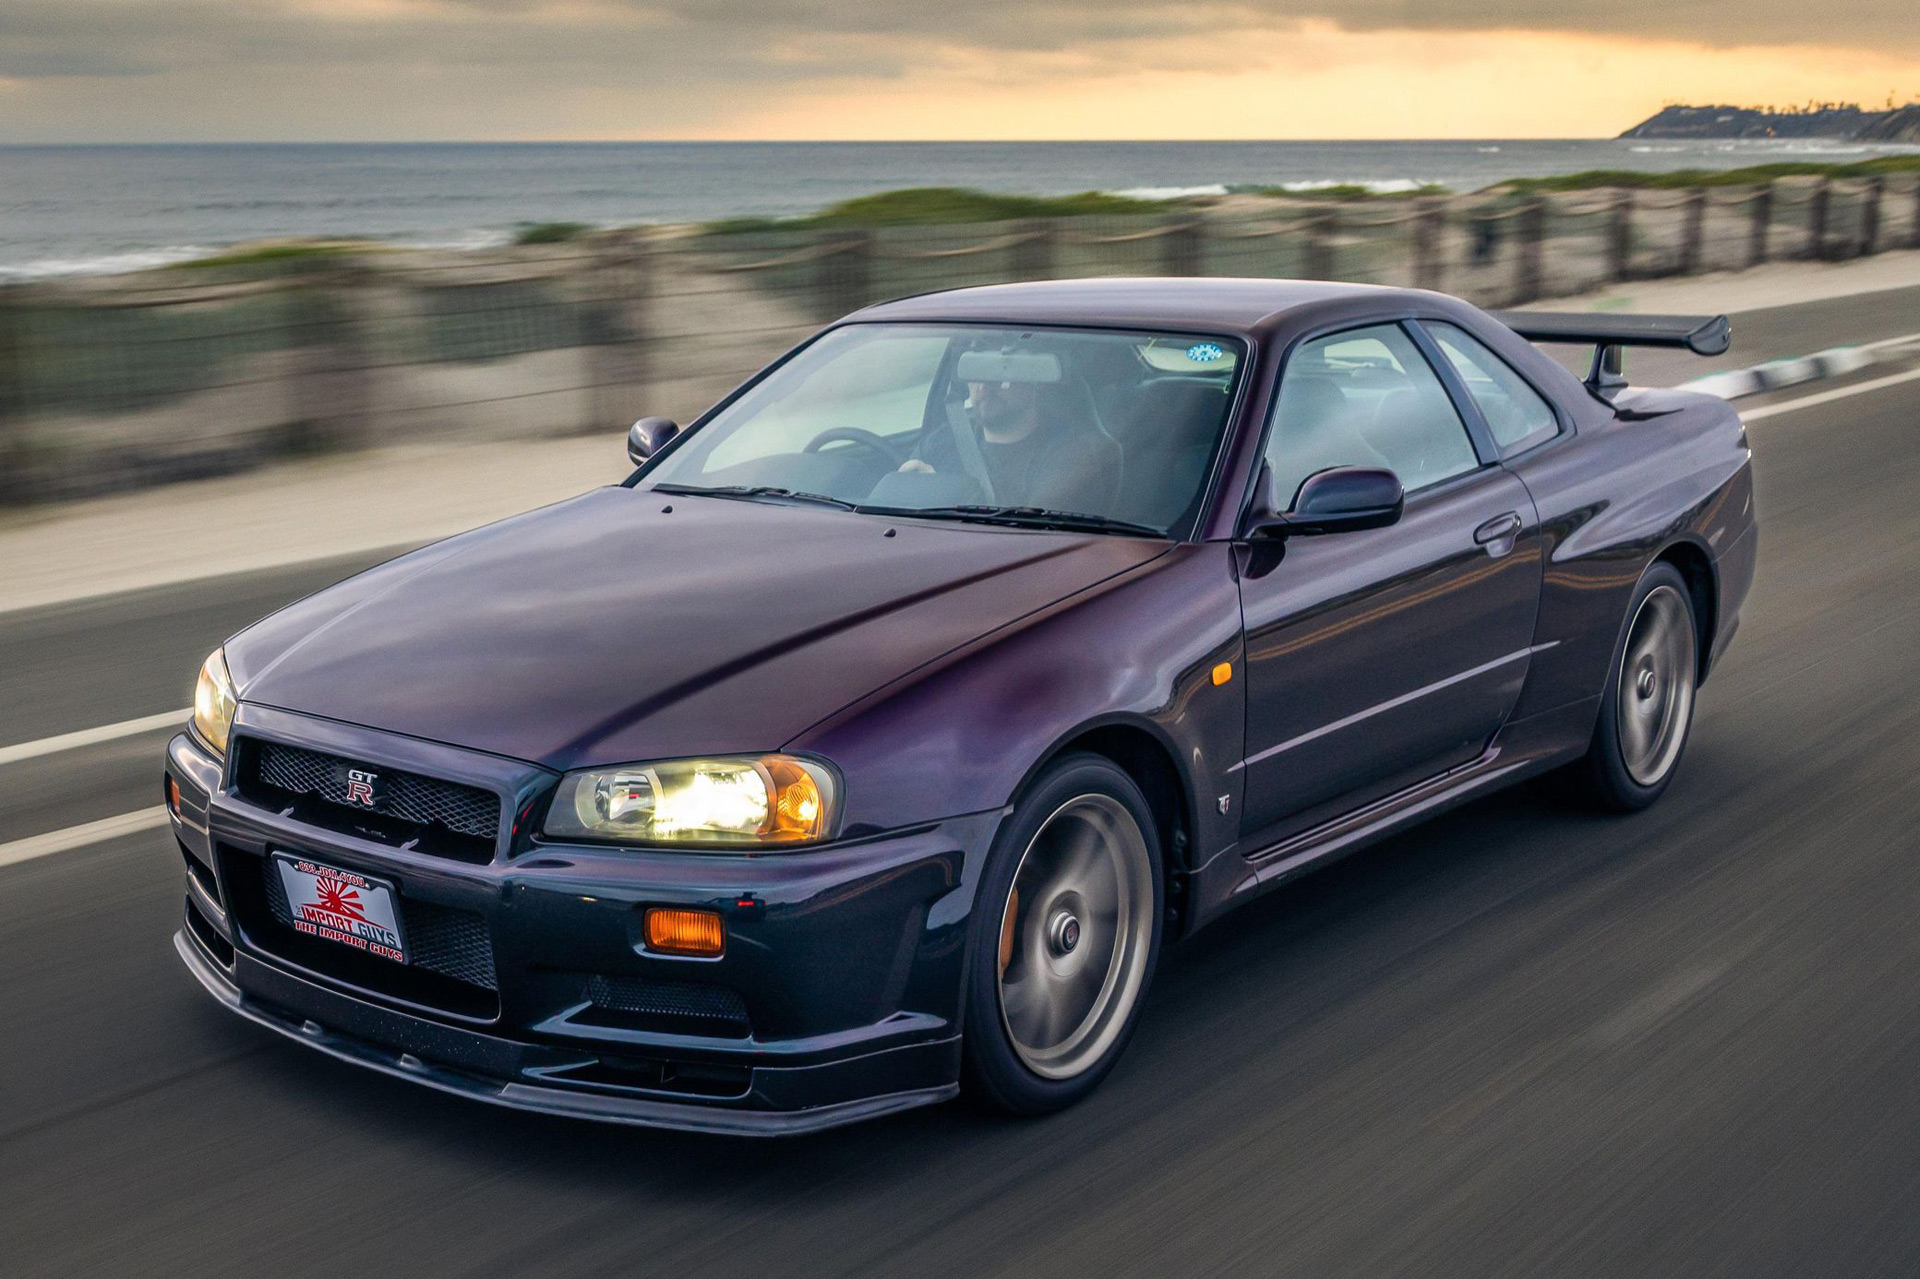 US-legal R34 Nissan Skyline GT-R in Midnight Purple up for sale Auto Recent